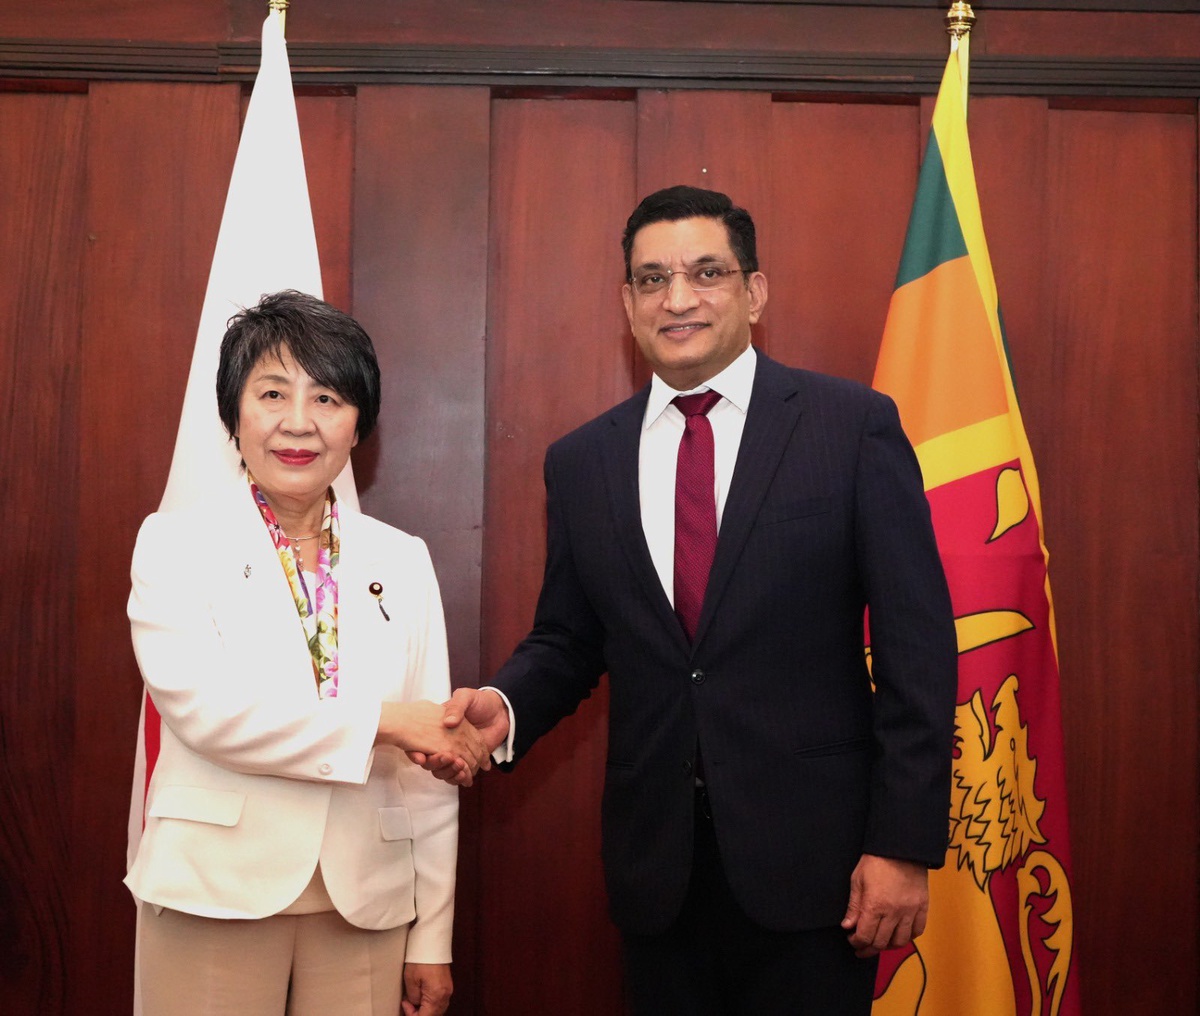 Japan urges swift debt restructuring for Sri Lanka’s economic recovery